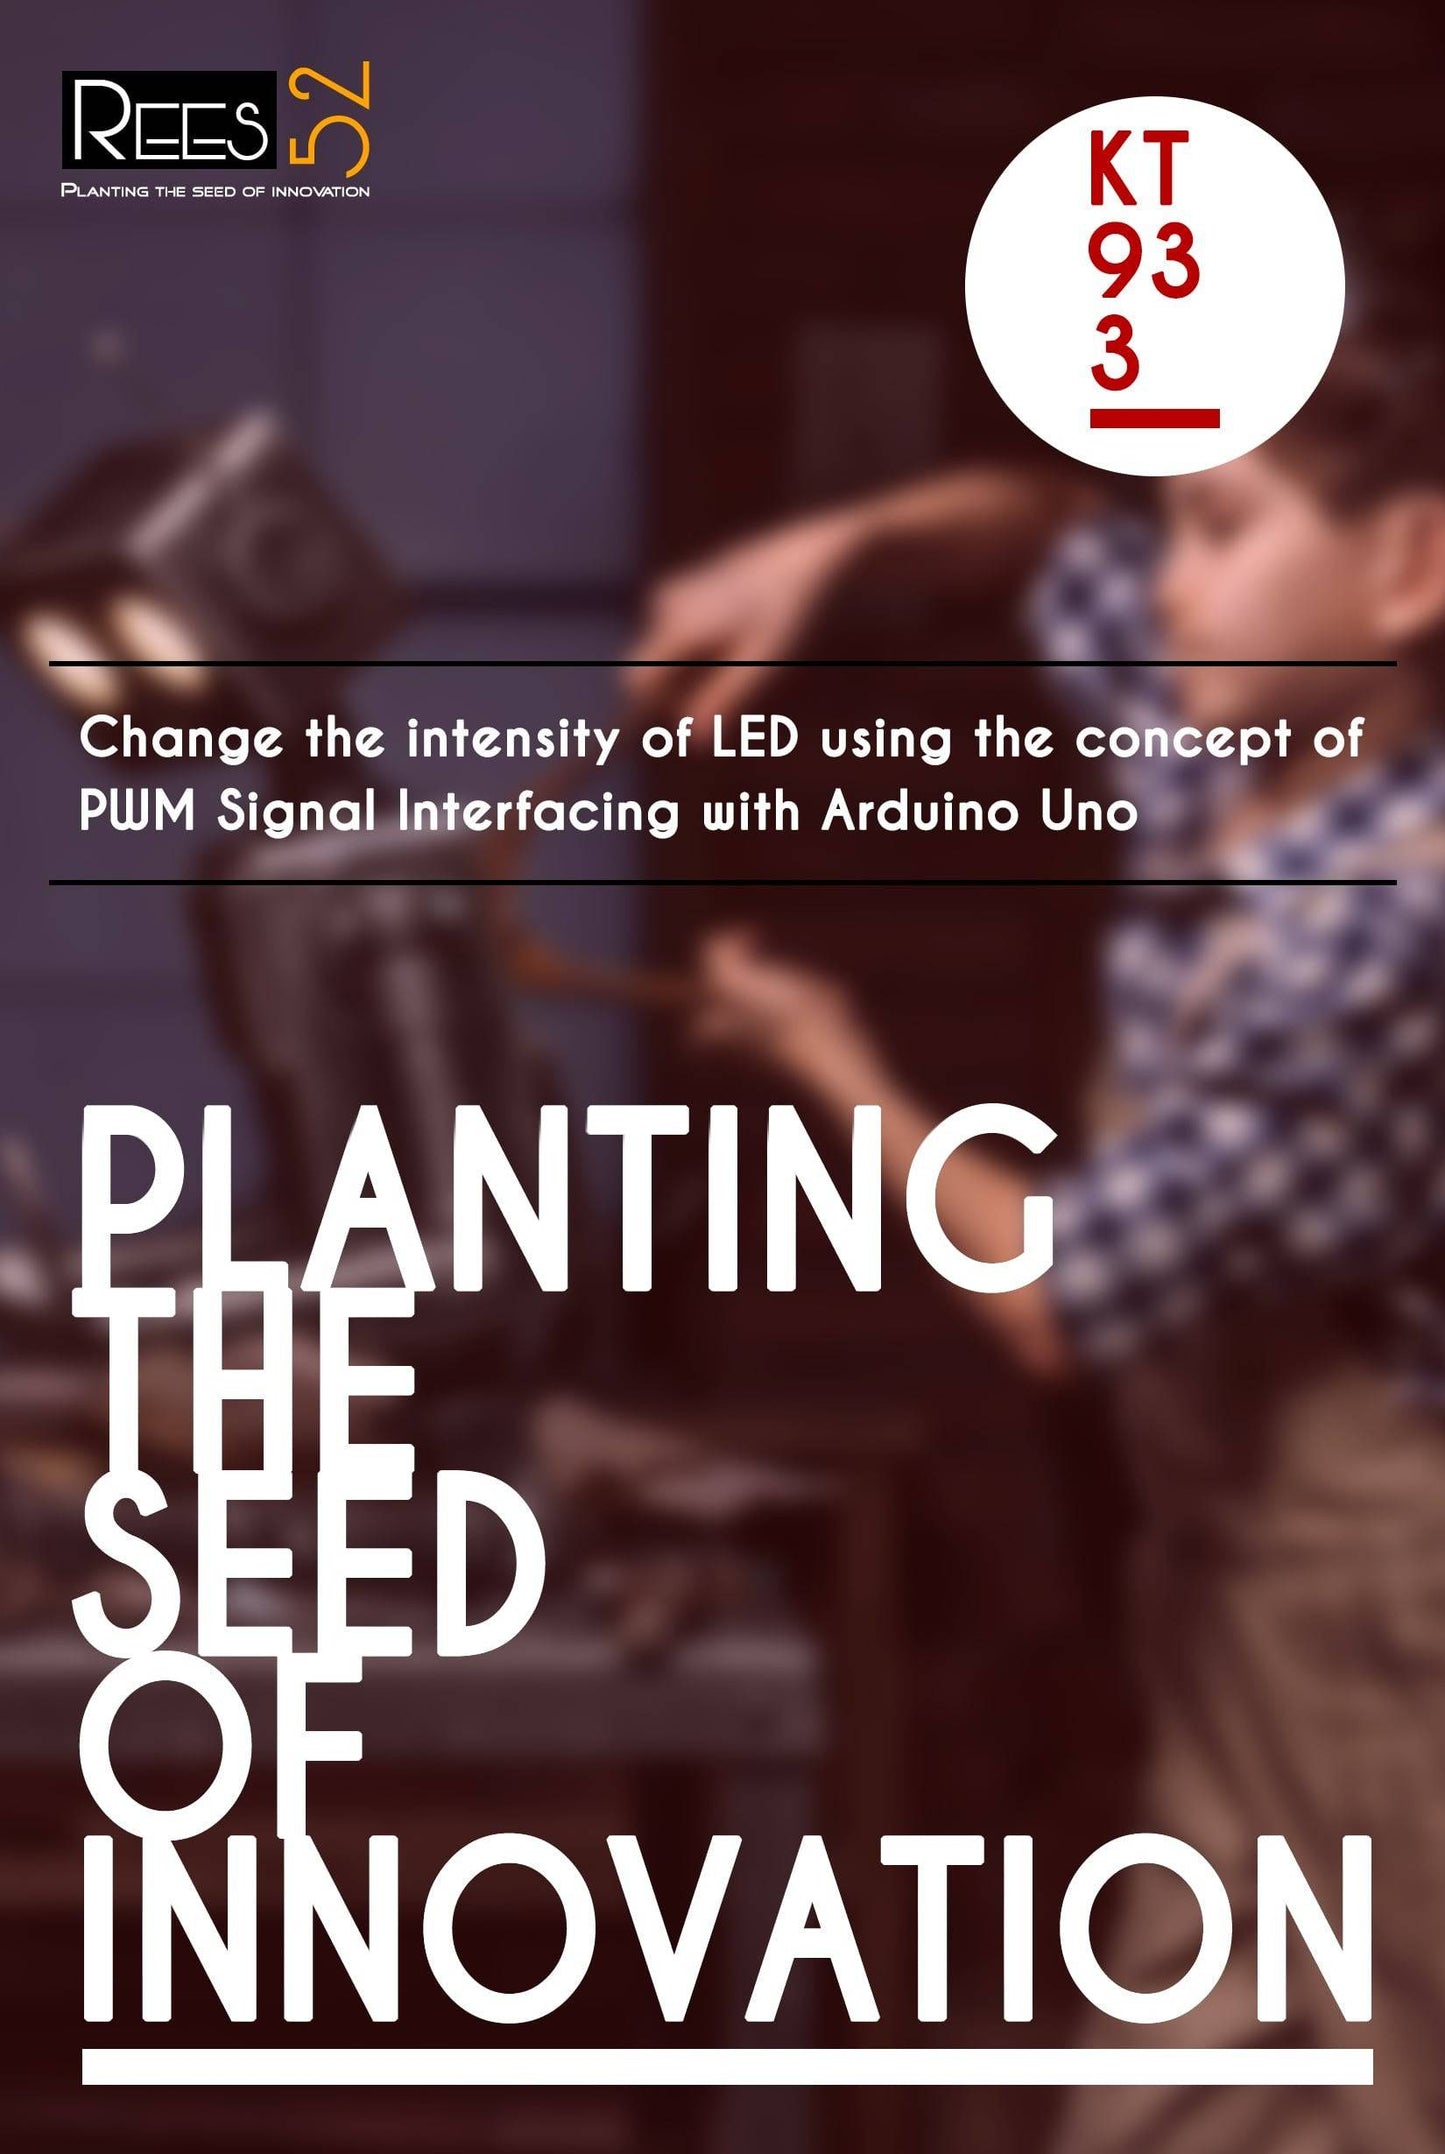 CHANGE THE INTENSITY OF LED USING THE CONCEPT OF PWM SIGNAL INTERFACING WITH ARDUINO UNO  - KT933 - REES52